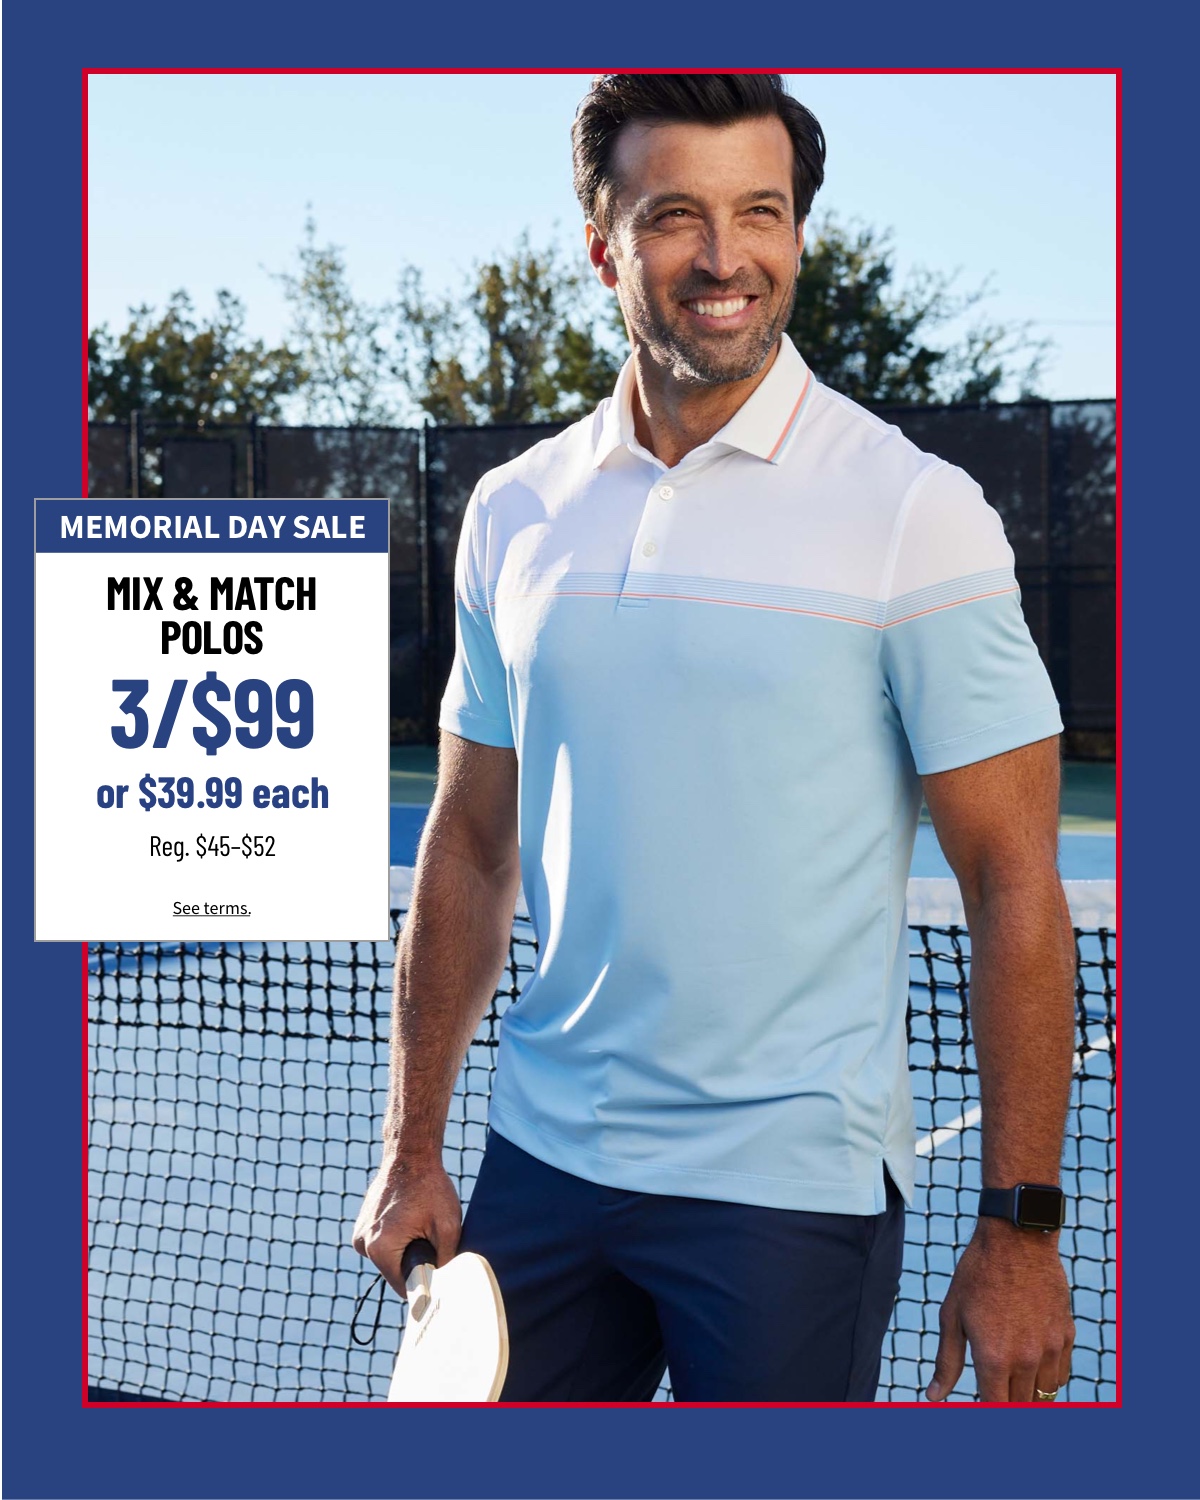 Mix and Match Polos 3/$99 or $39.99 each